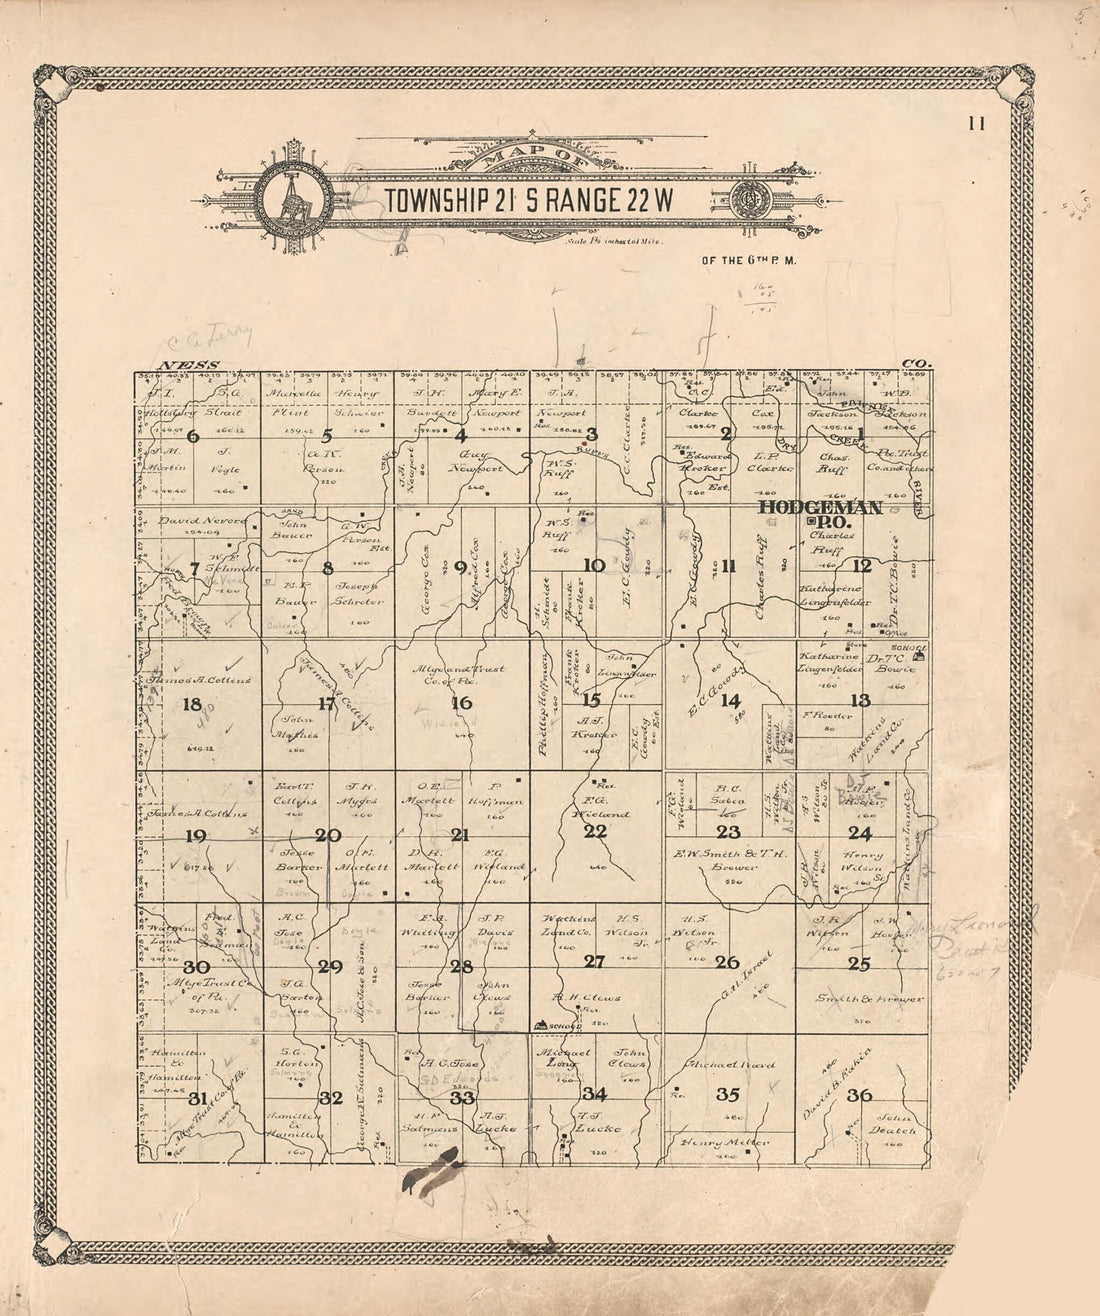 This old map of Map of Township 21 S Range 22 W from Standard Atlas of Hodgeman County, Kansas from 1907 was created by  Geo. A. Ogle &amp; Co in 1907